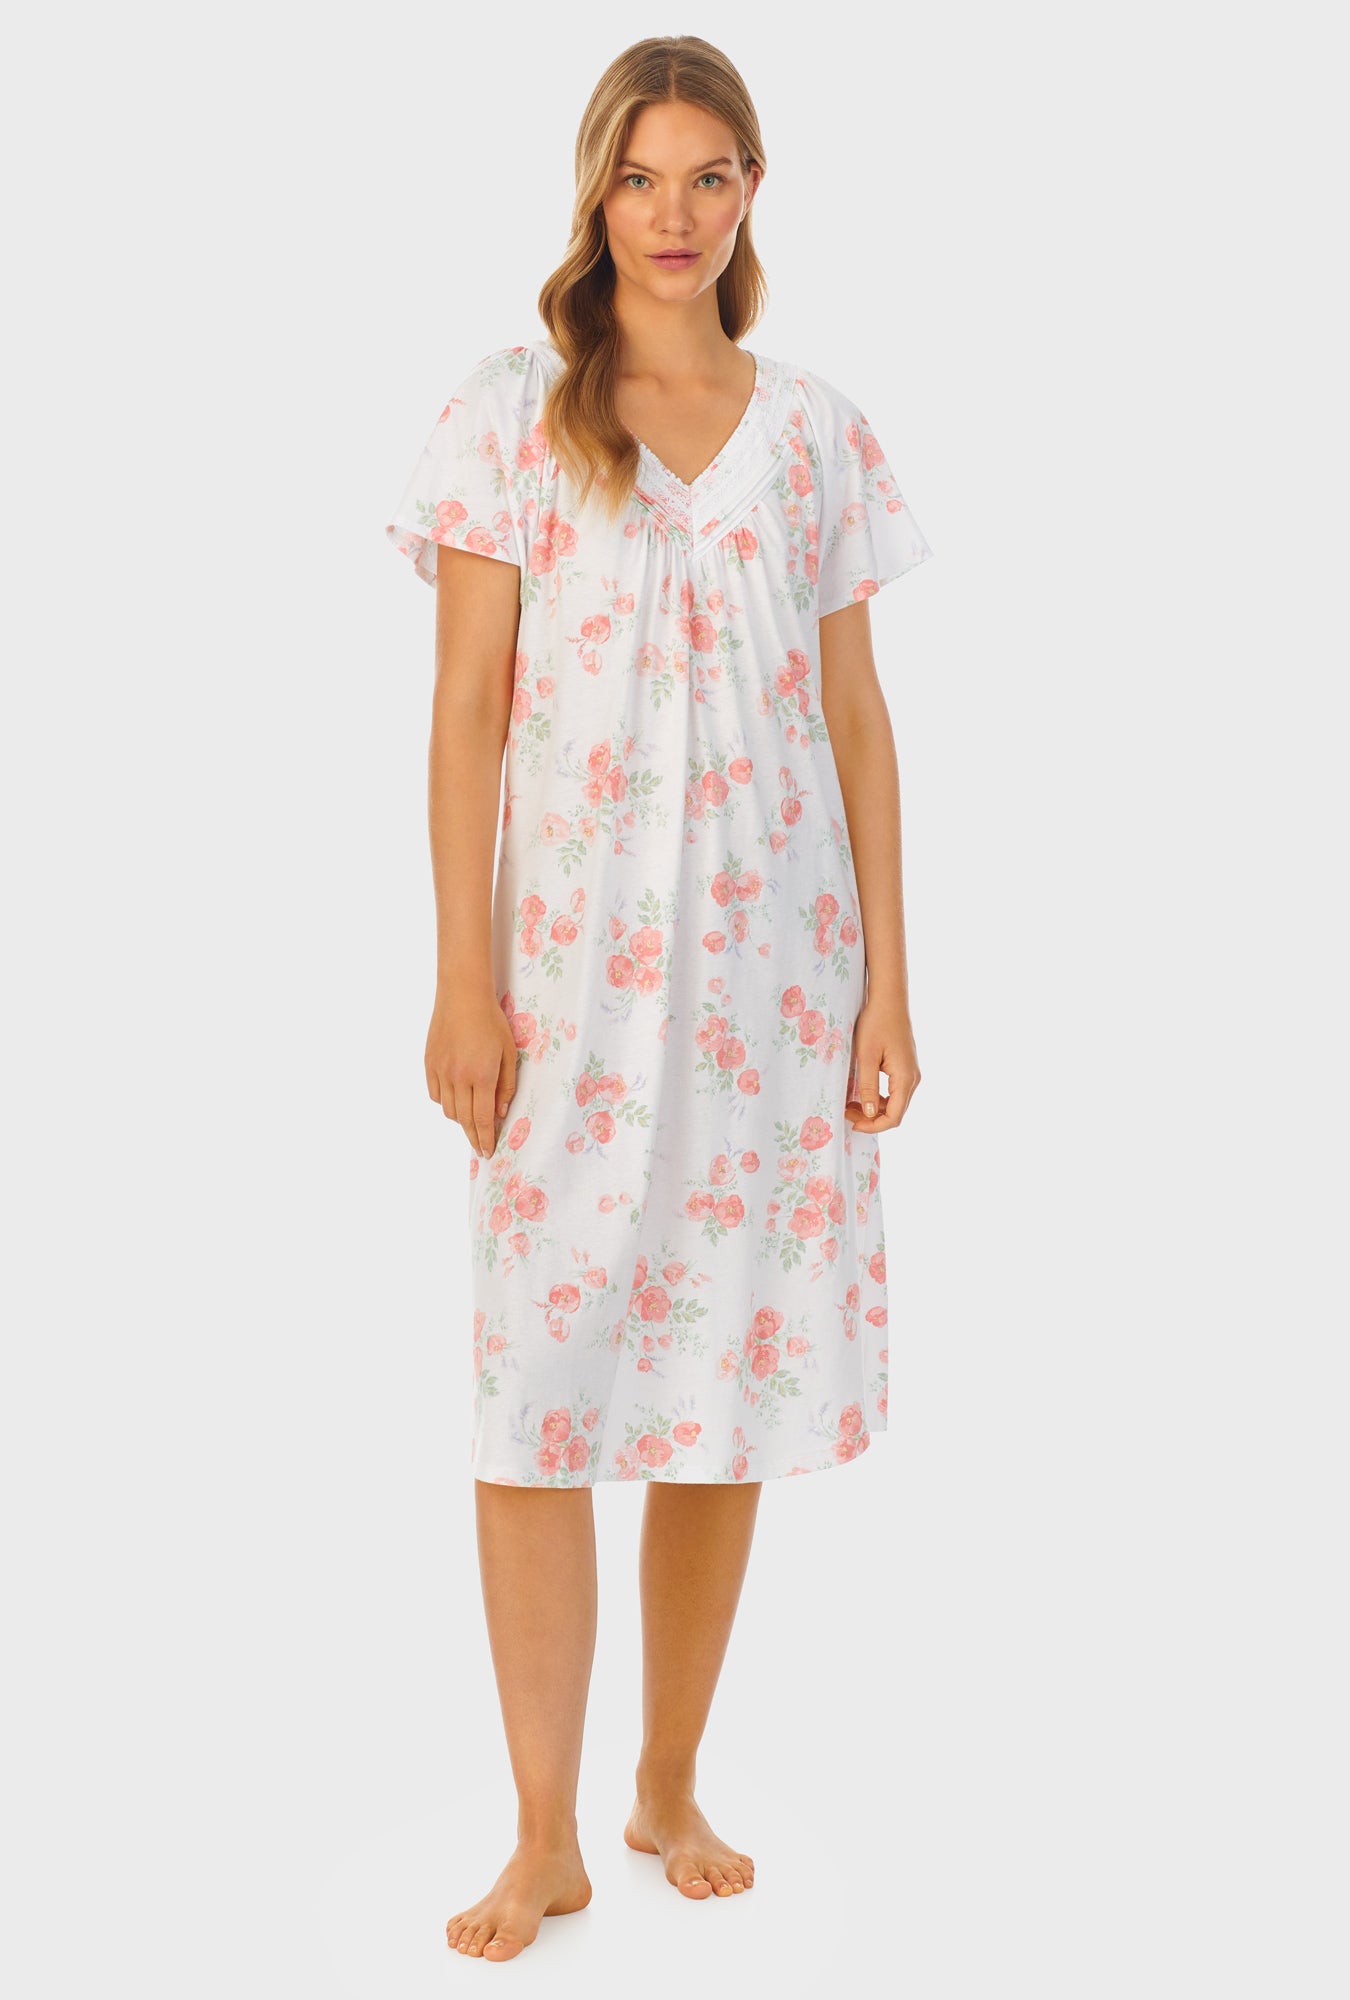 A lady wearing white short sleeve Cotton Waltz Nightgown with Watercolor Fleur print